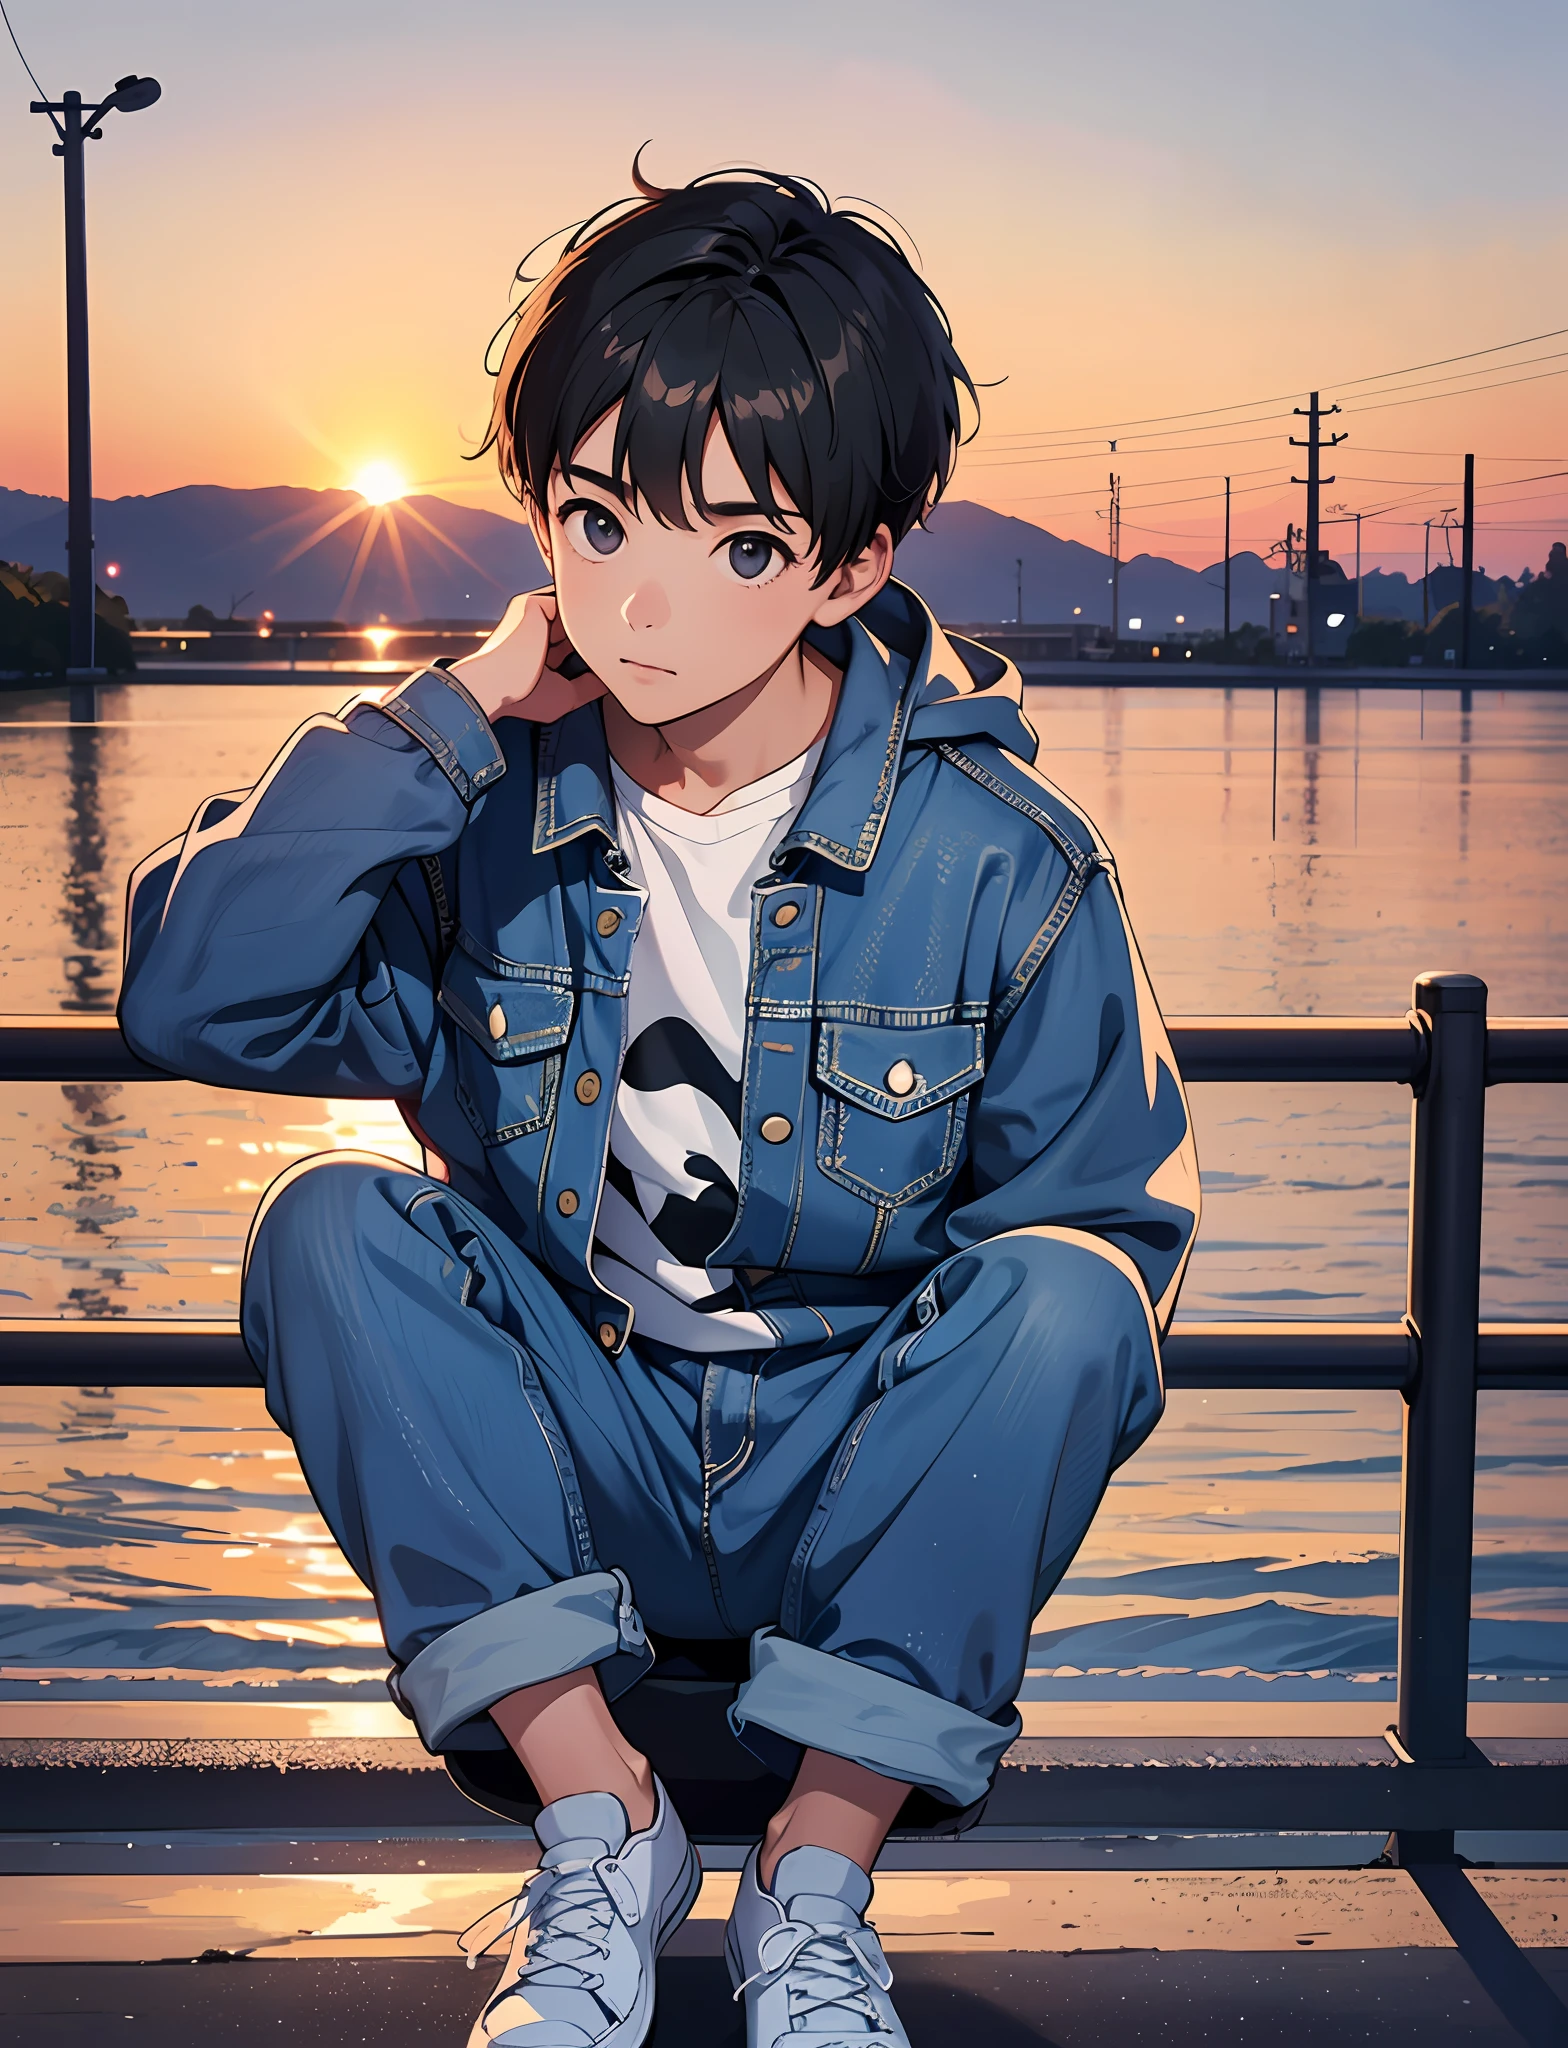 A young boy with，Wear a denim jacket，Wear sneakers，Sit on a wooden bench by the side of the road，Looking at the clouds in the sky，Pedestrians shuttling，Sunset and sunset，Close-up full-body photo，Ultra-high definition